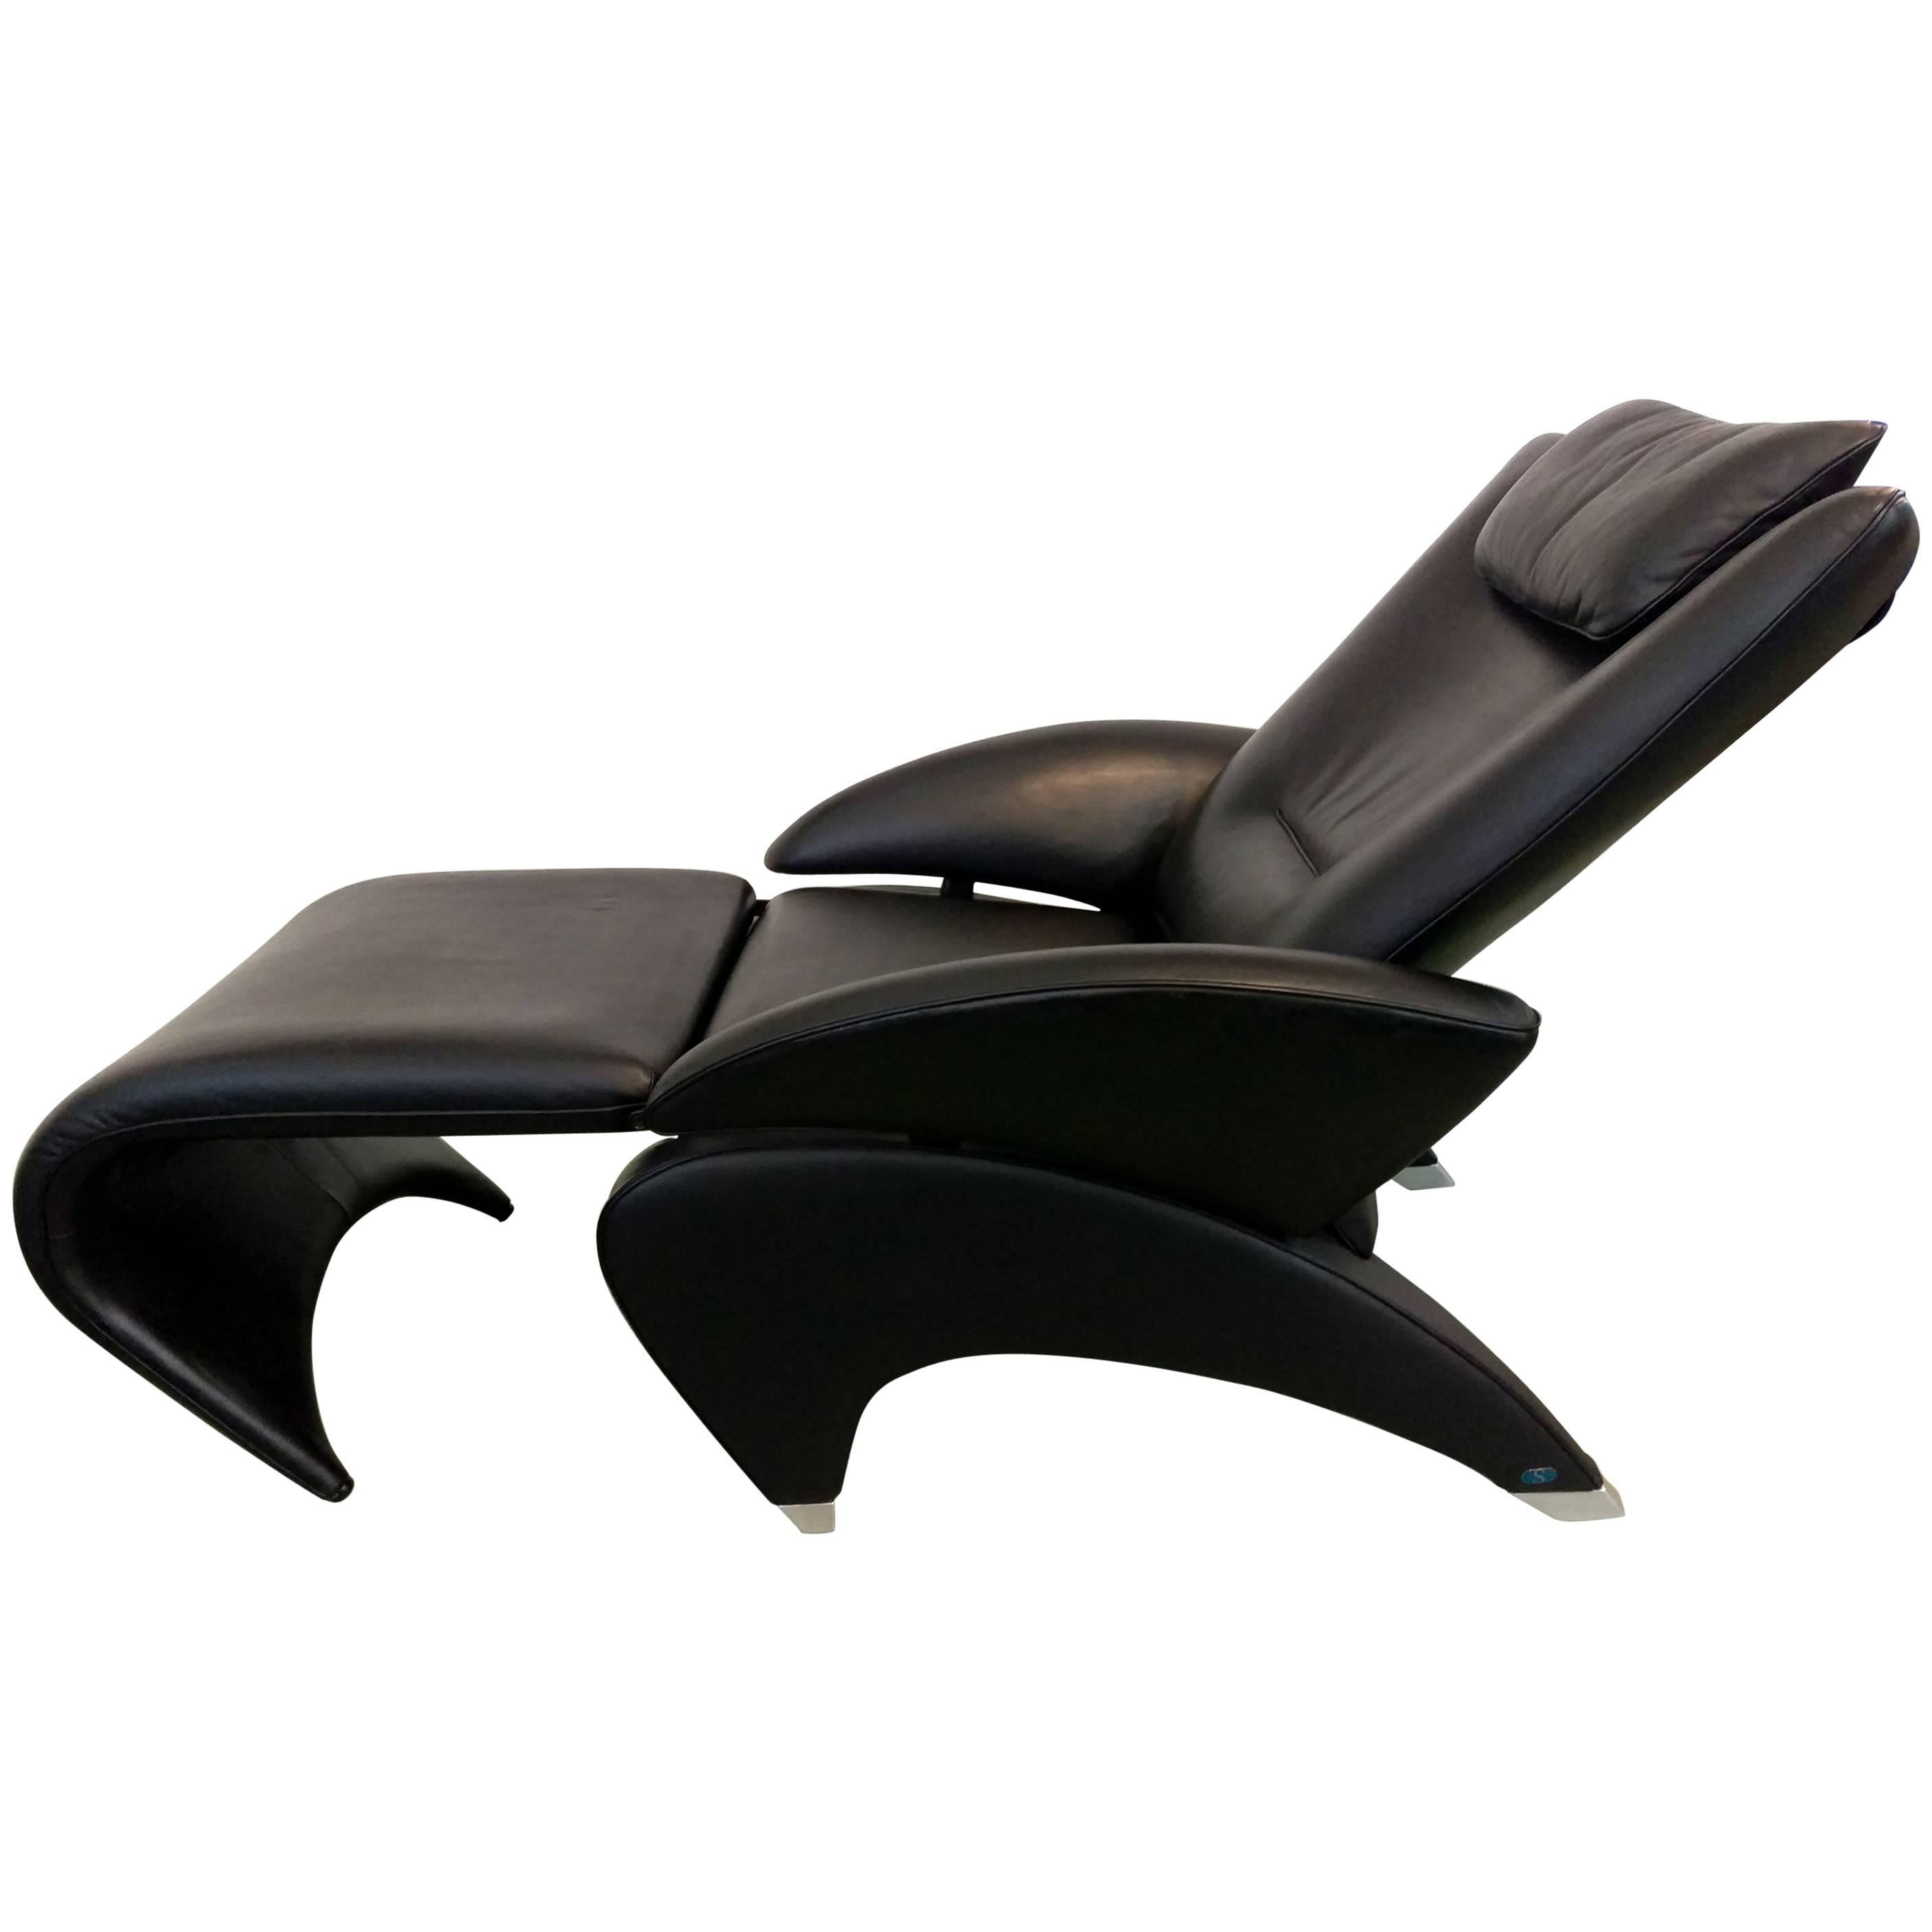 Rare De Sede Recliner with Retractable Chaise Lounge